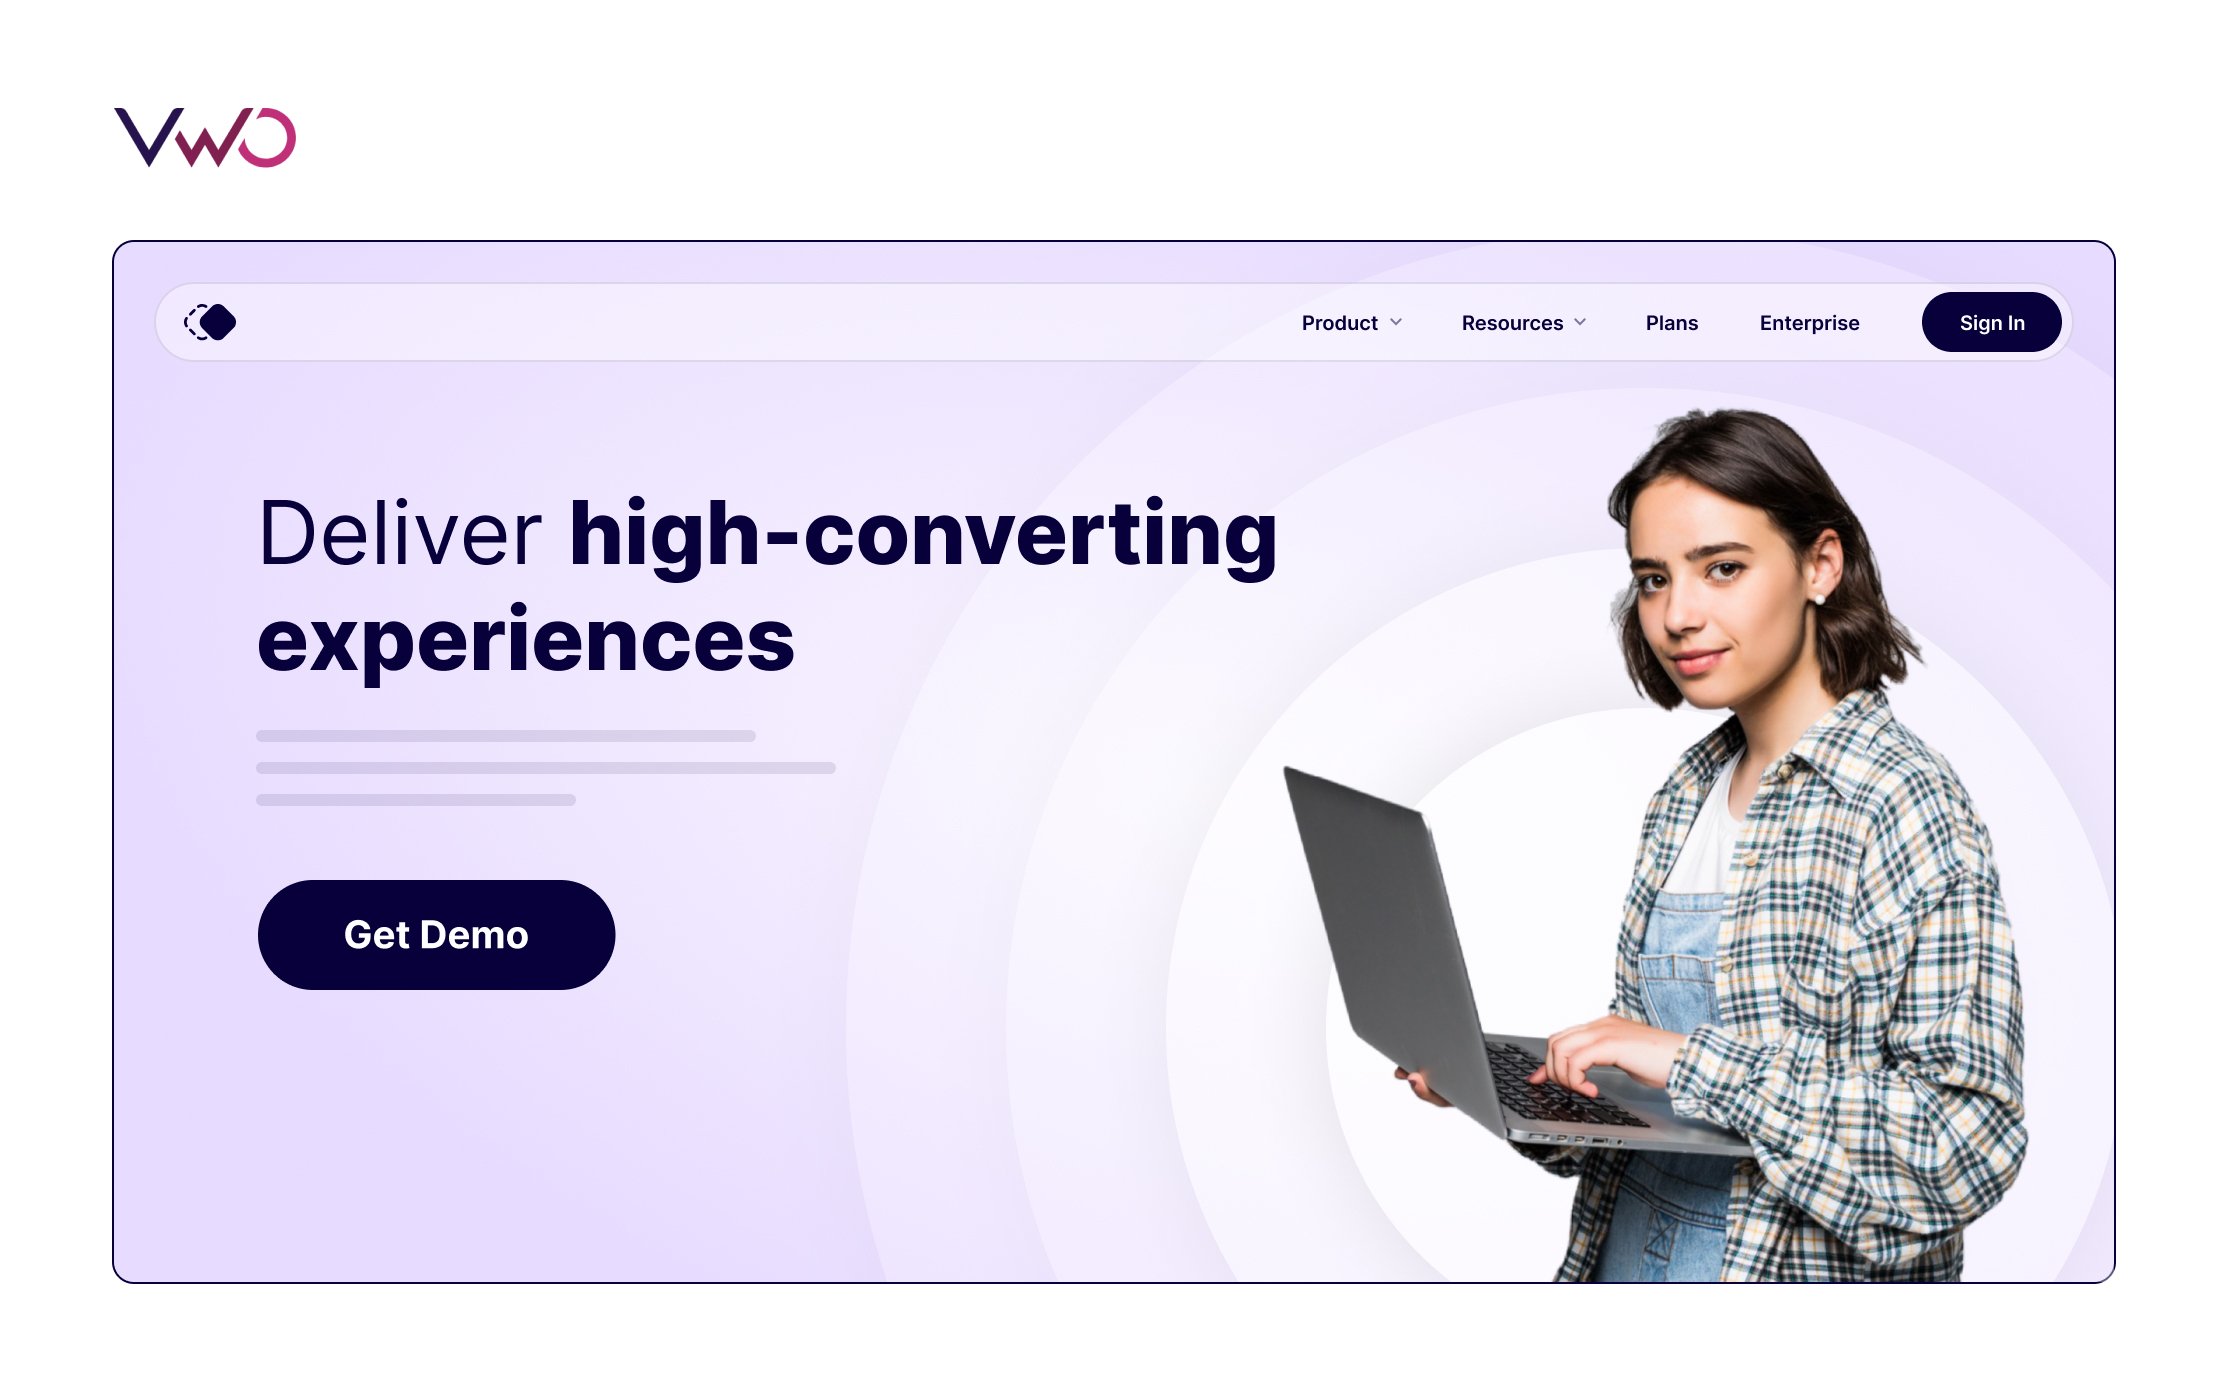 Example of a landing page